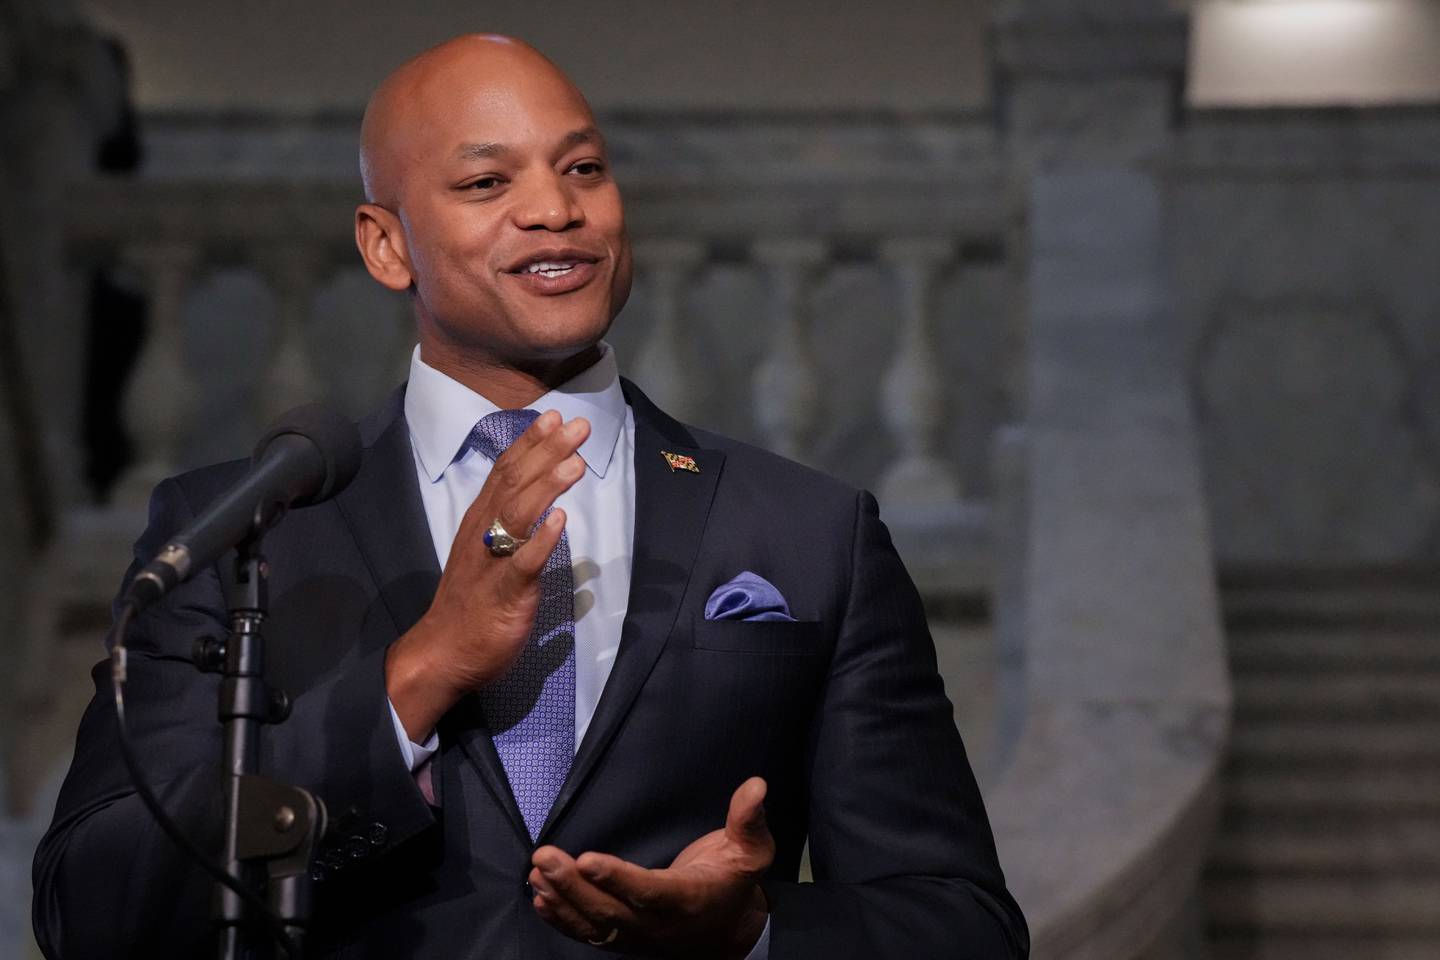 Governor-elect Wes Moore speaks during a press conference at the Maryland State House on 11/10/22 to discuss the upcoming transition of power from Gov. Larry Hogan.